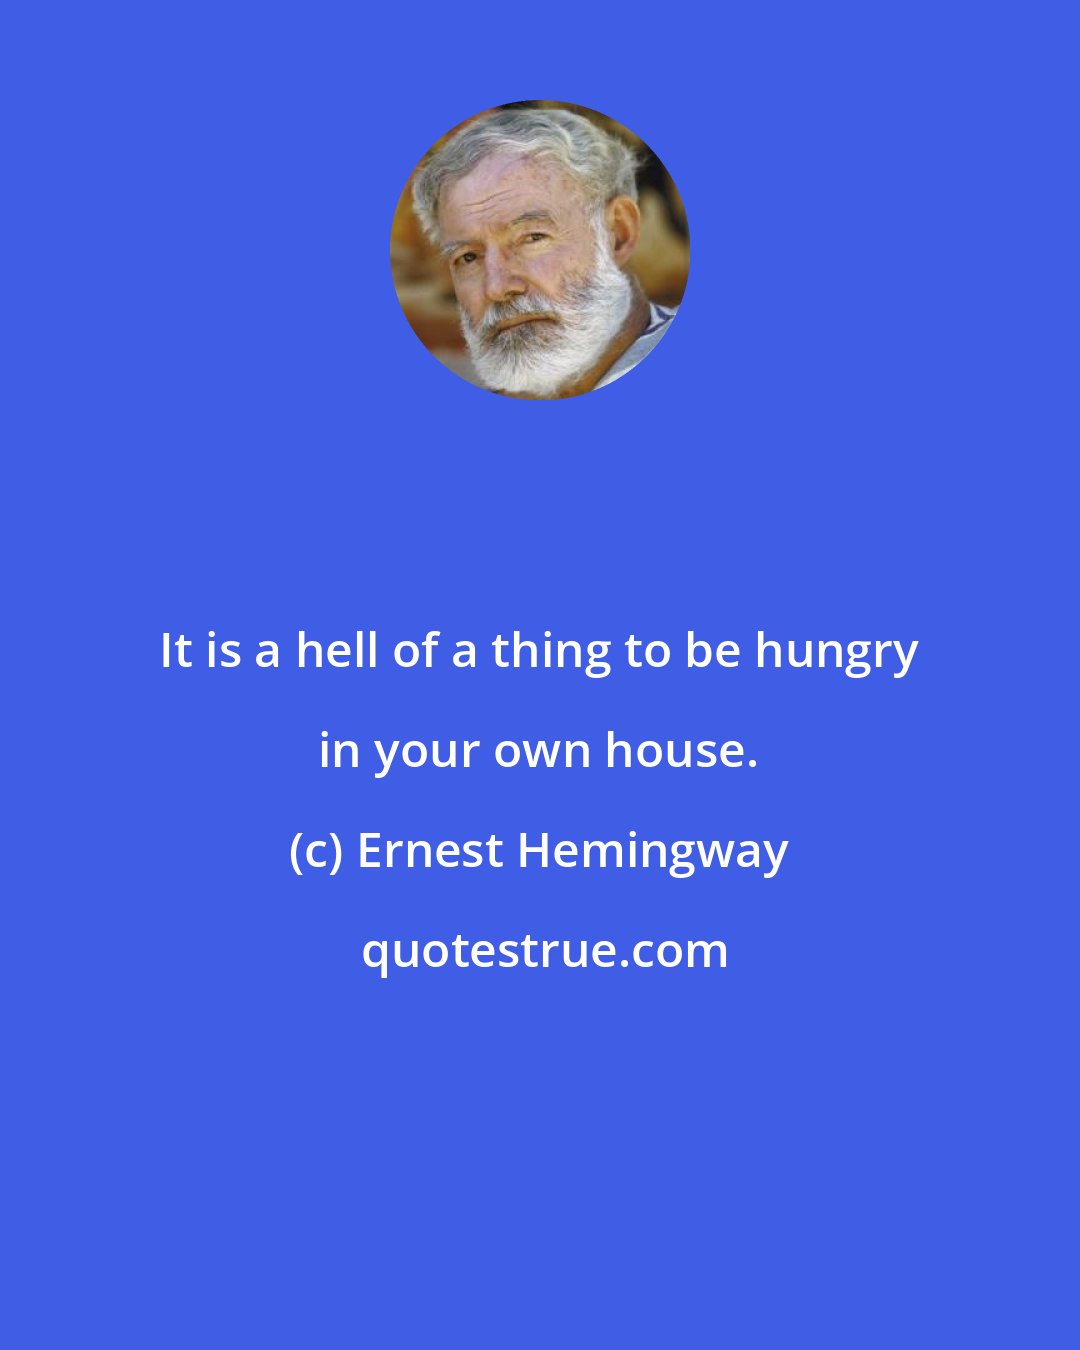 Ernest Hemingway: It is a hell of a thing to be hungry in your own house.